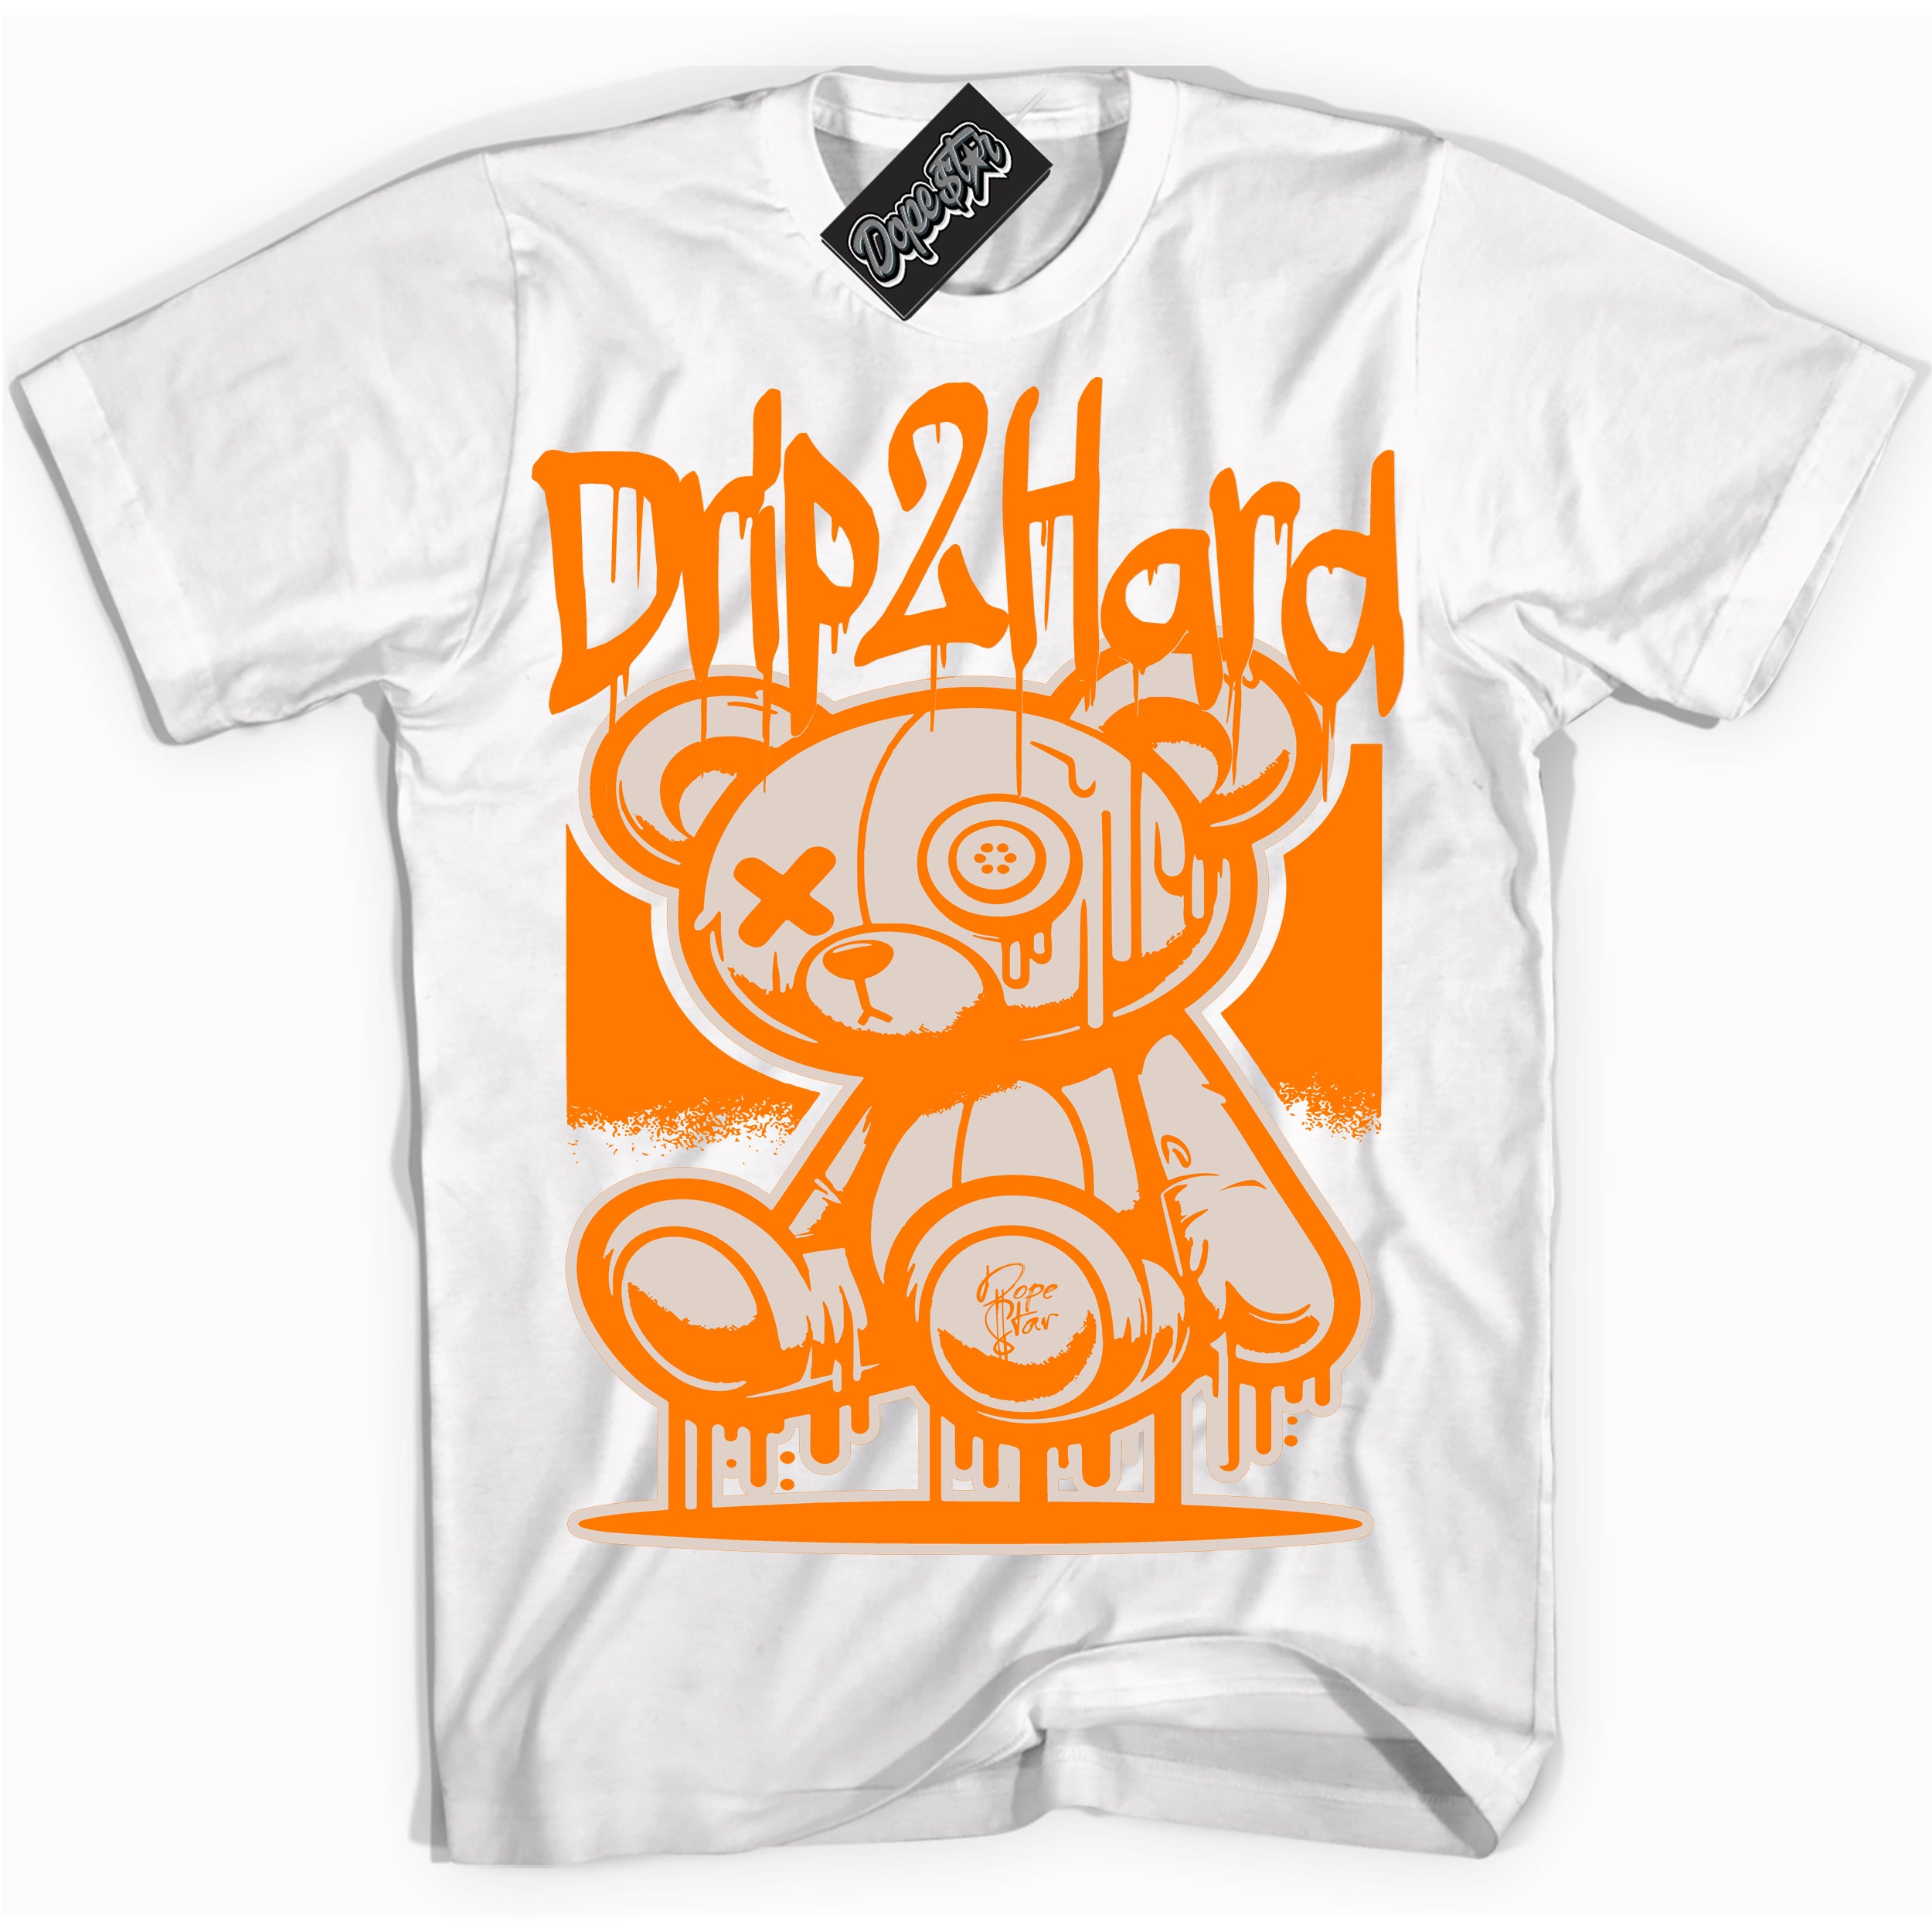 Cool White graphic tee with “ Drip 2 Hard ” design, that perfectly matches Peach Cream